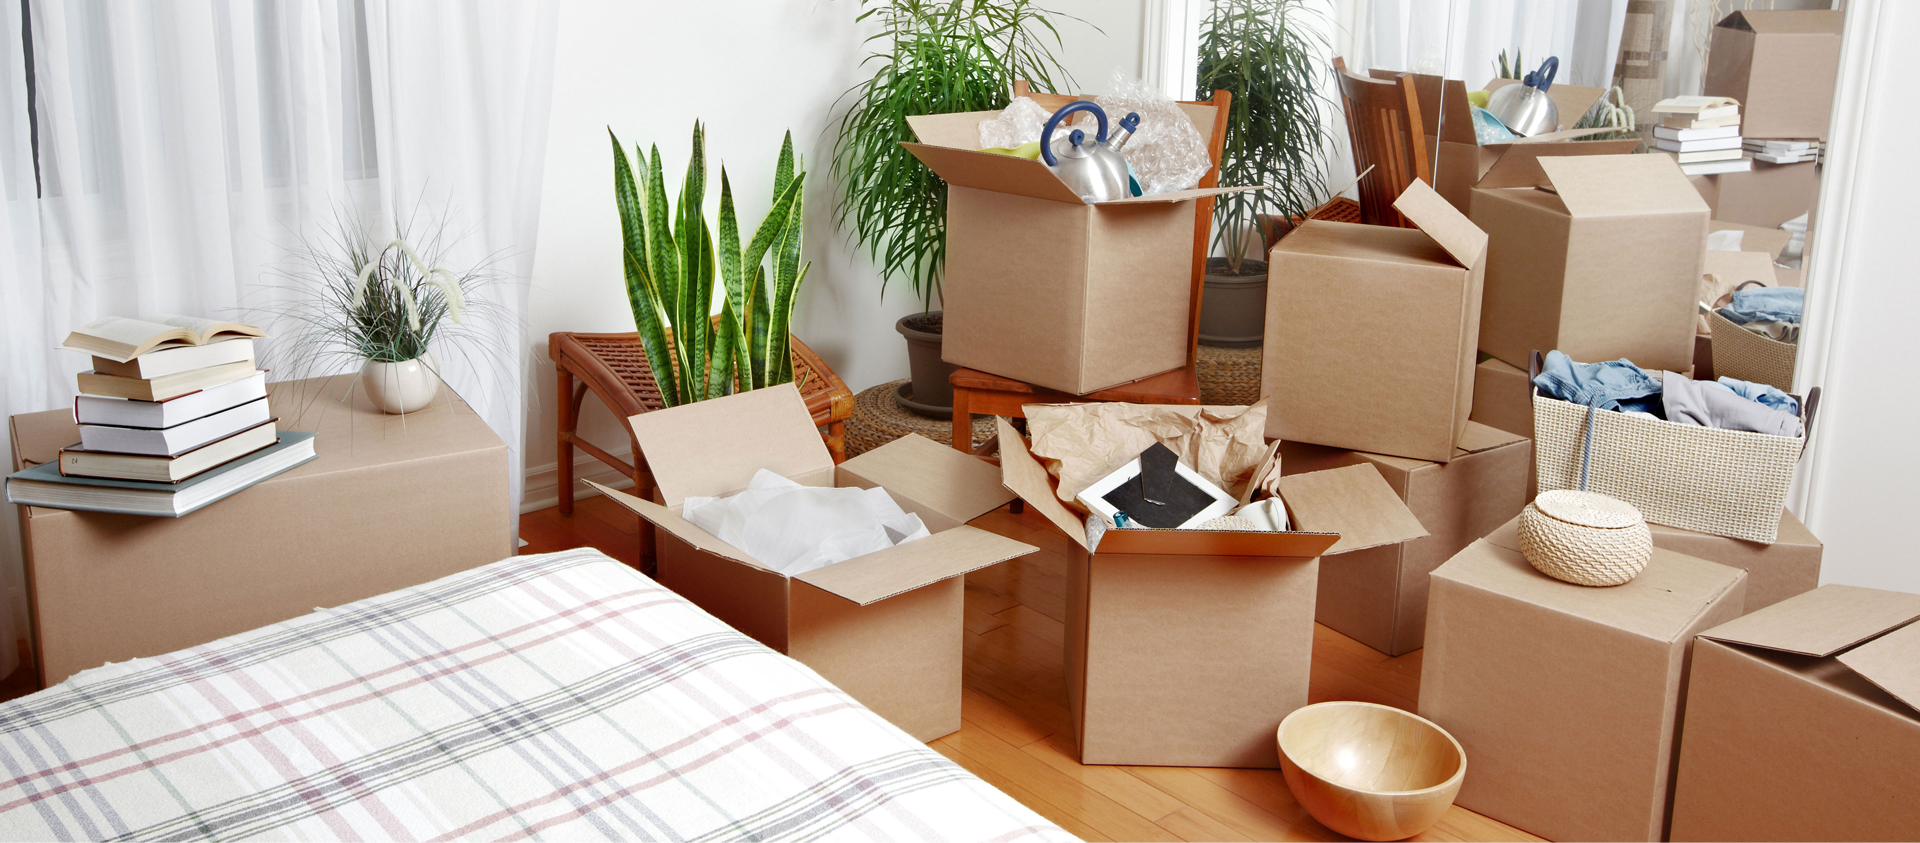 cheap furniture removalists adelaide, cheap removalists adelaide, furniture removal adelaide, furniture removals adelaide, interstate removalists adelaide, movers adelaide, piano removalists adelaide, removal self storage adelaide, removalists adelaide, removals adelaide